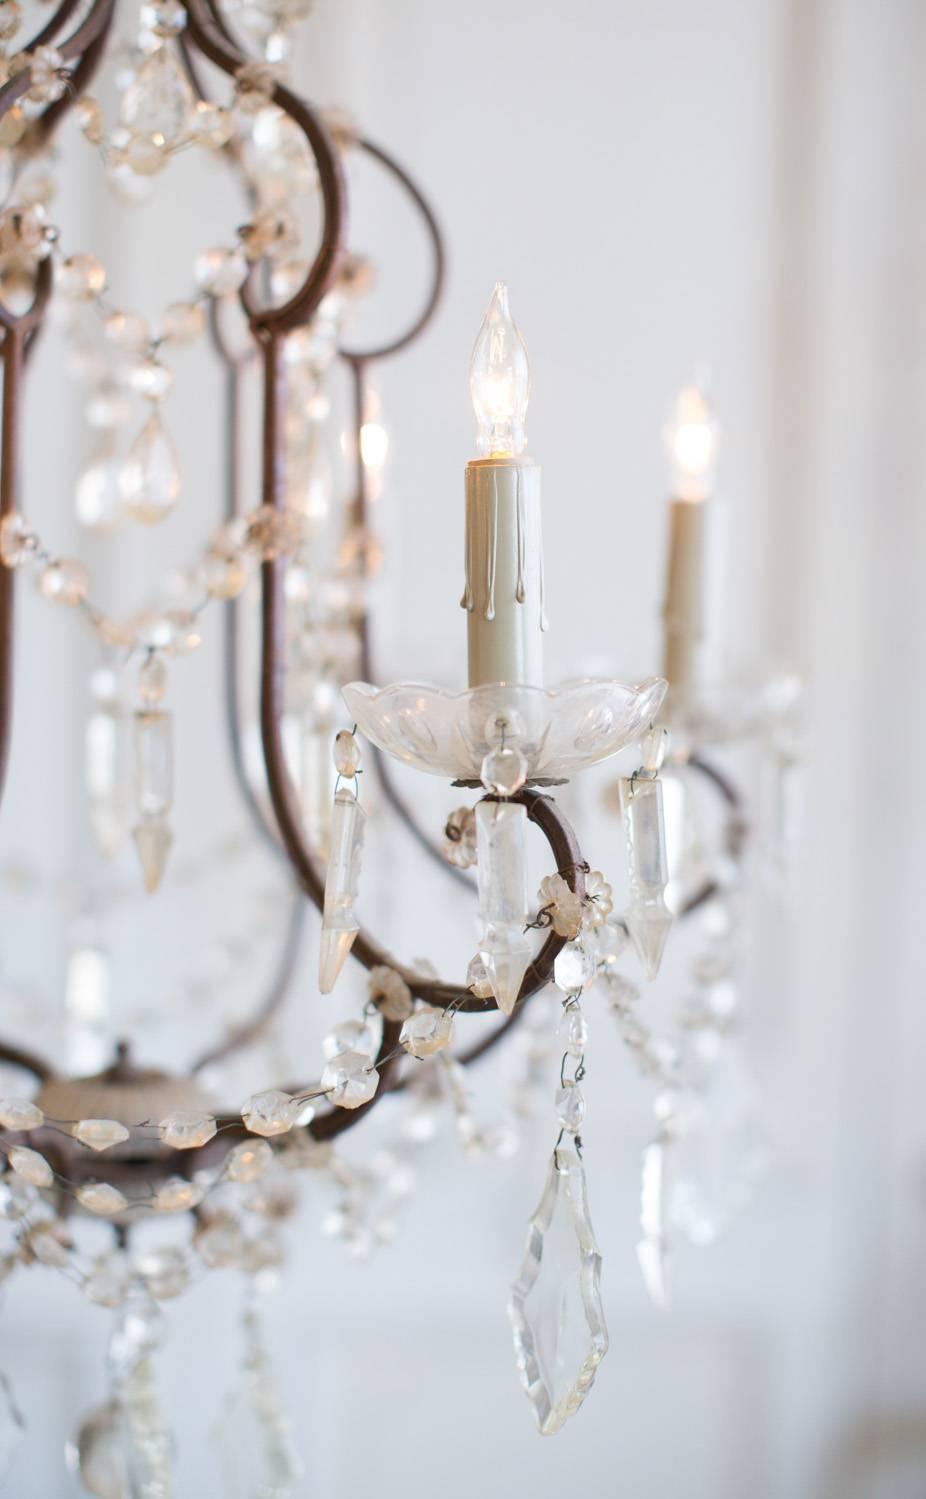 Petite chandelier with curved iron frame. Beautiful crystals drip between the wire arms and lend a delicate glow to a small room.